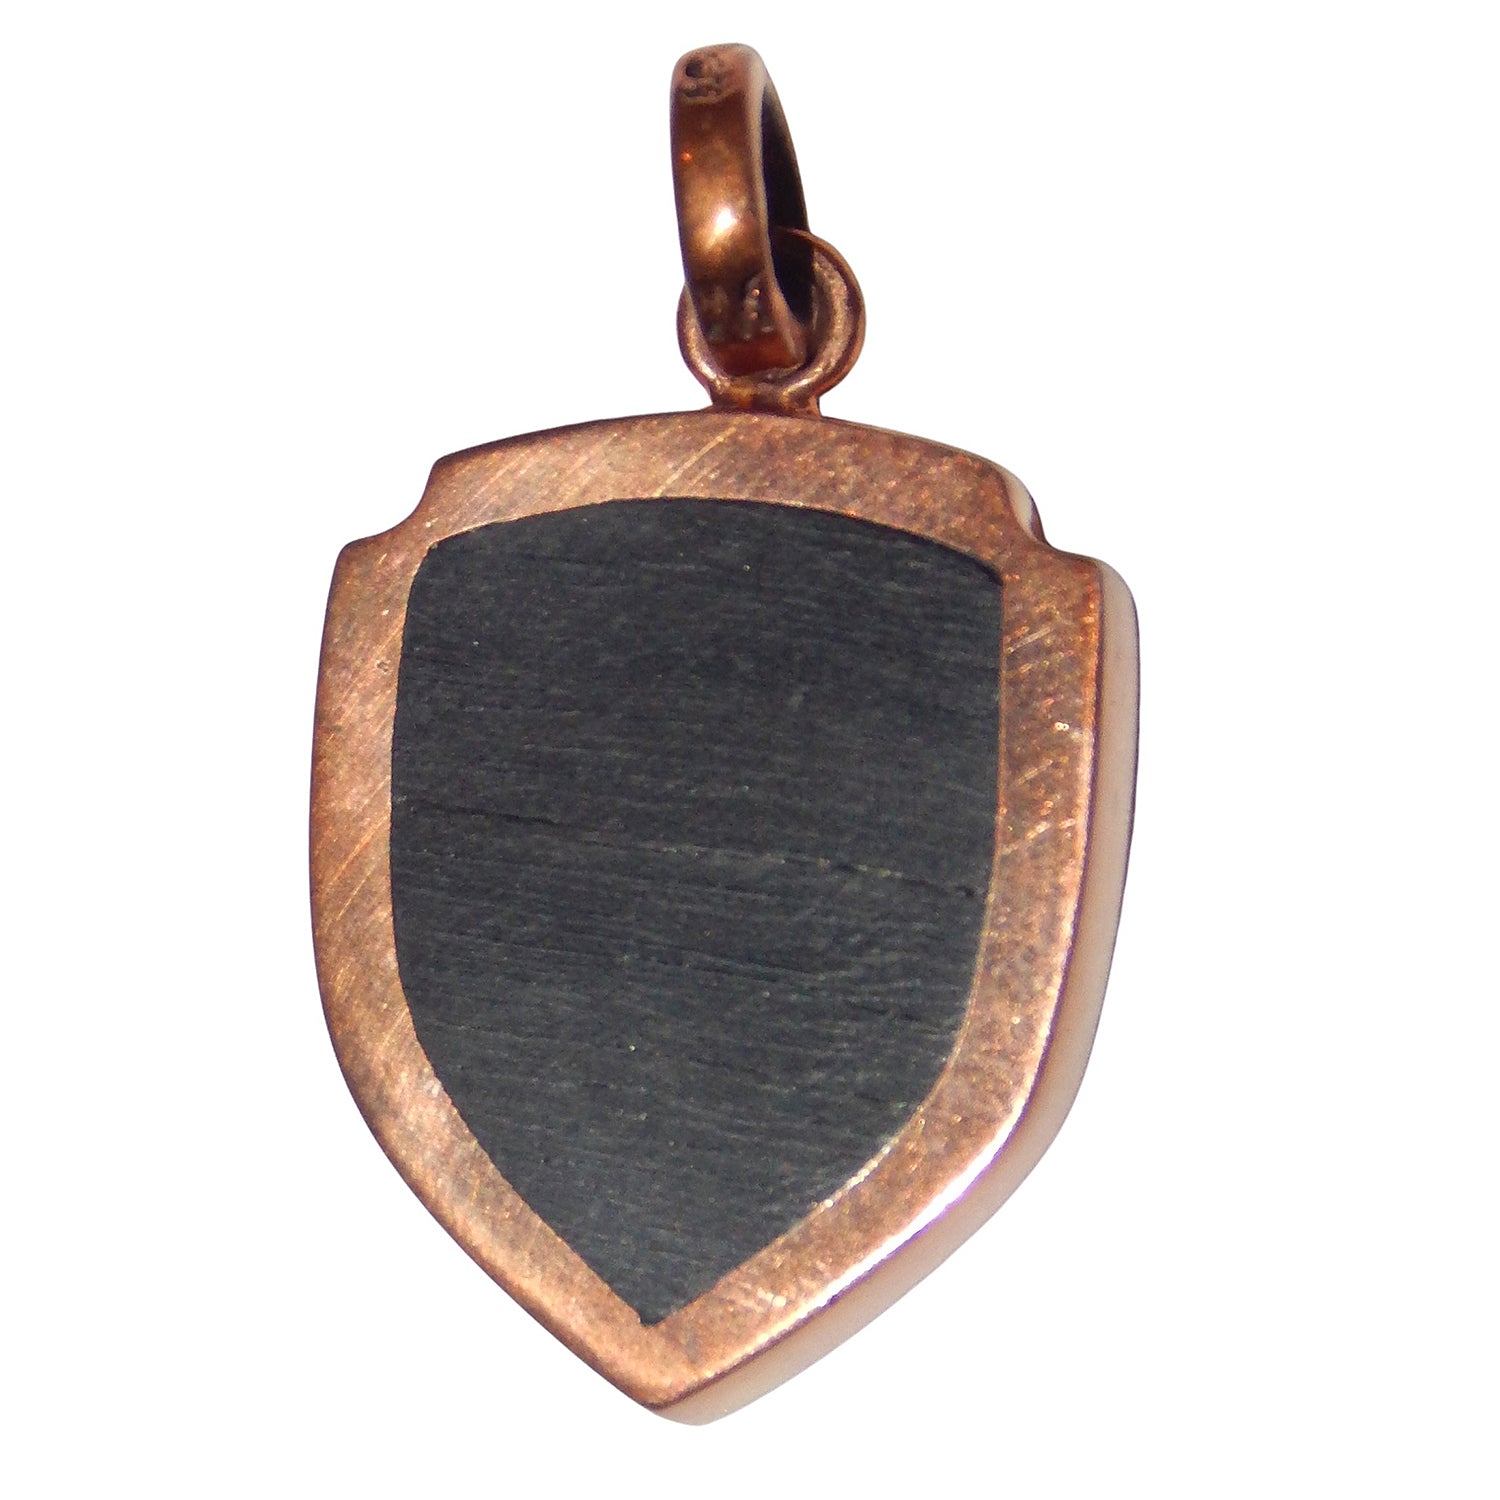 MARCOS - &quot;SHIELD&quot; Pendant in Copper with Ebony Wood Inlay